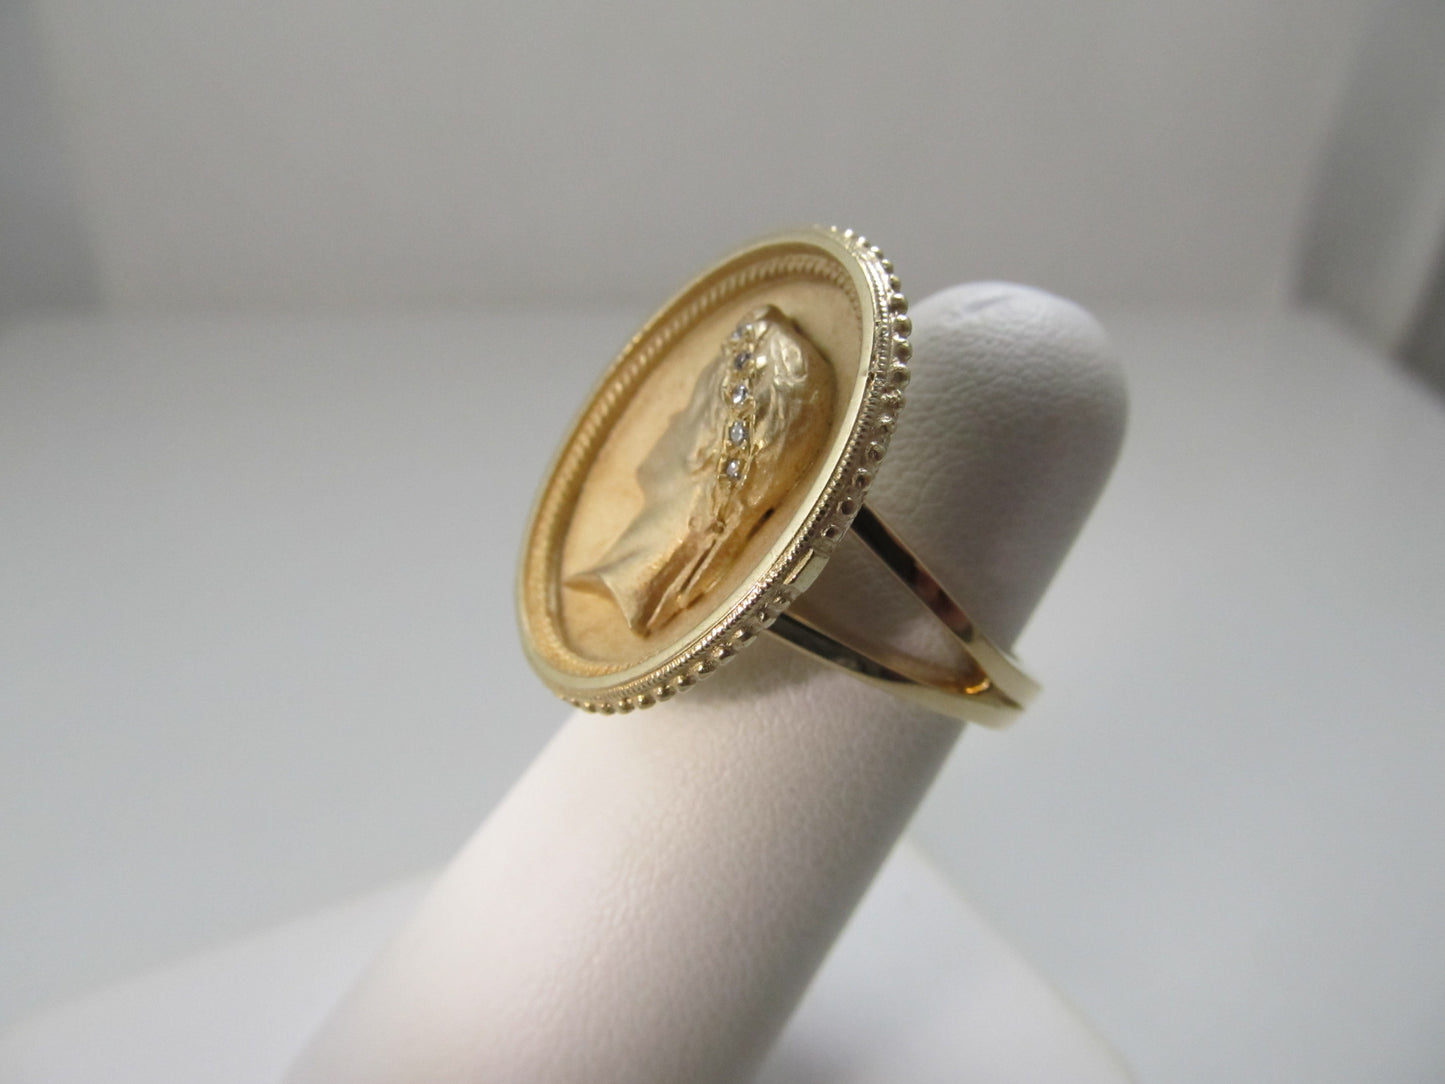 Great 14k ring with diamonds, man's profile